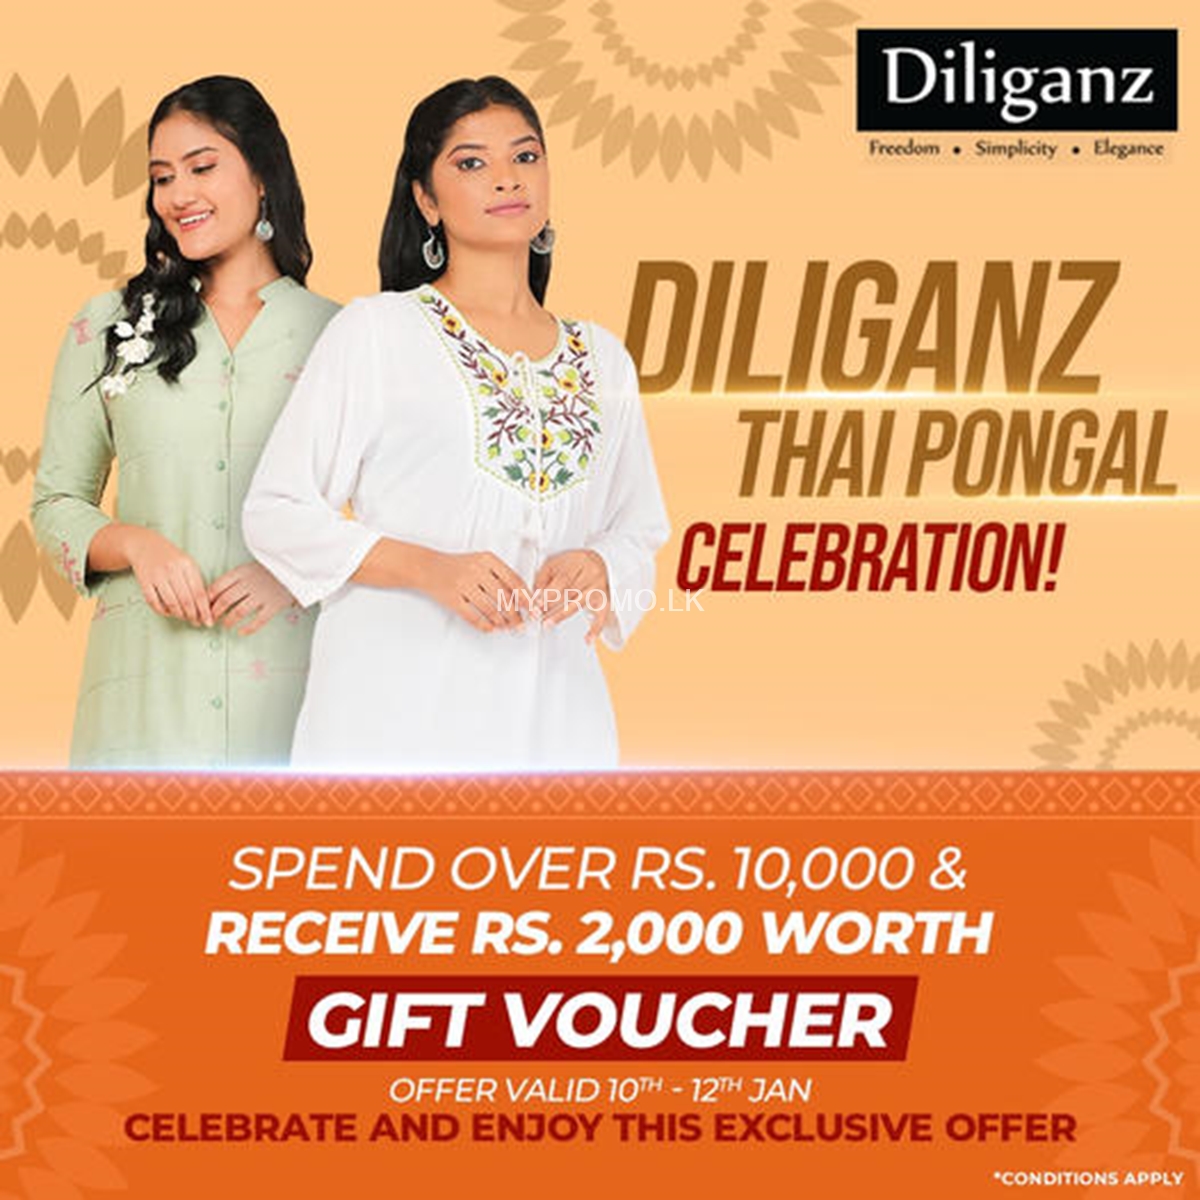 Thai Pongal with Diliganz